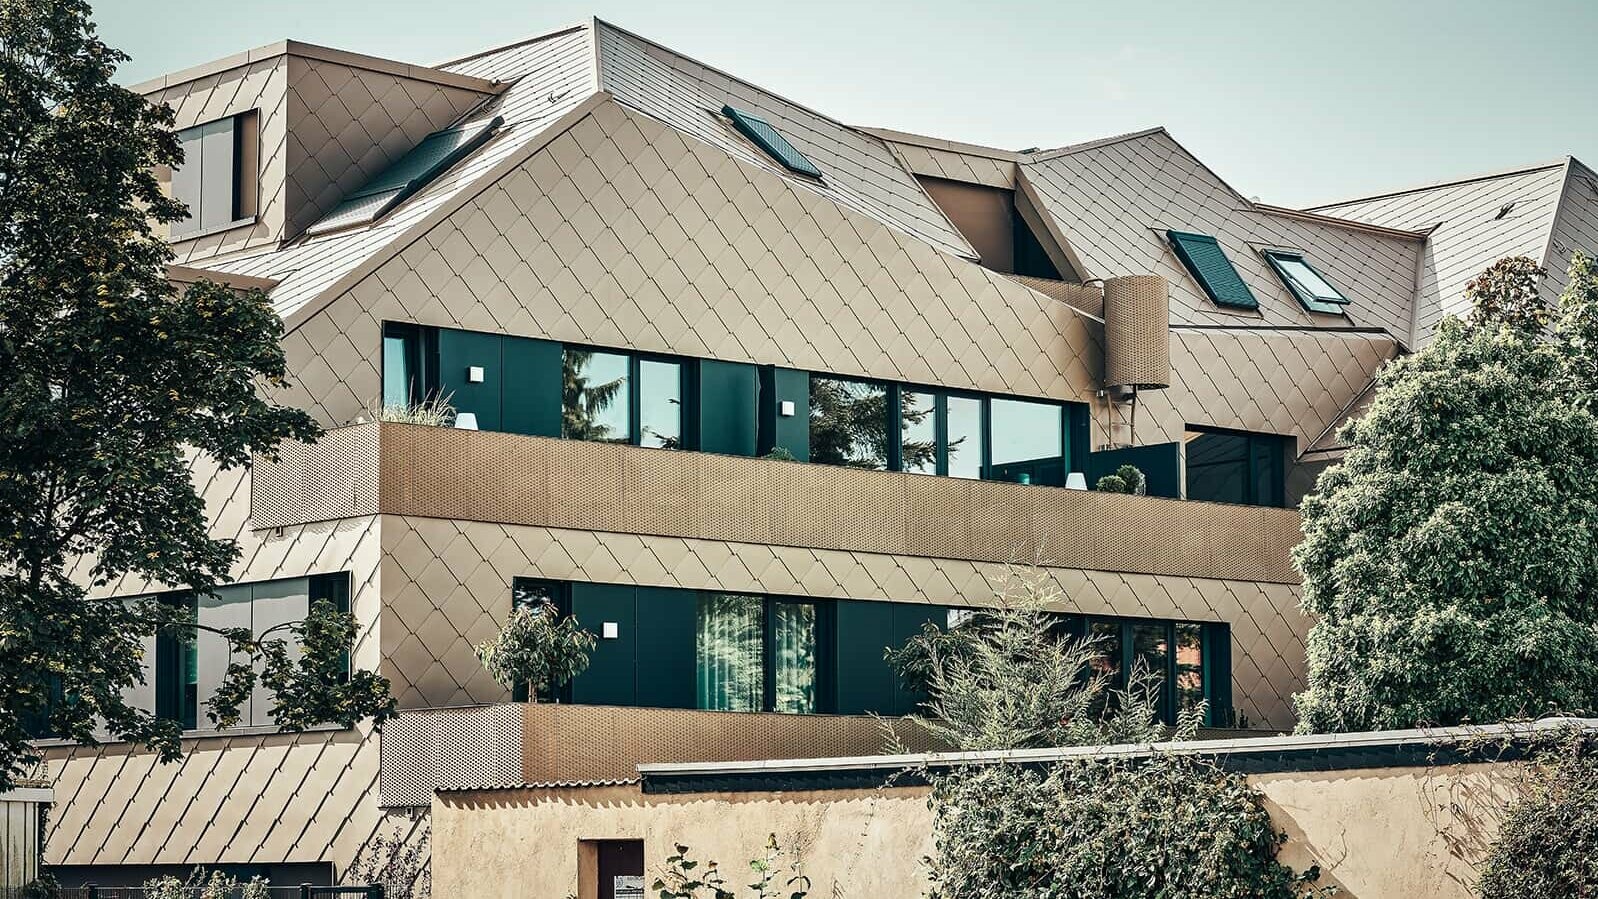 The rhomboid-shaped 44 × 44 façade tile in the special P.10 Bronze coating stretches over the entire structure like a uniform skin and gives the surface a pearly quality.